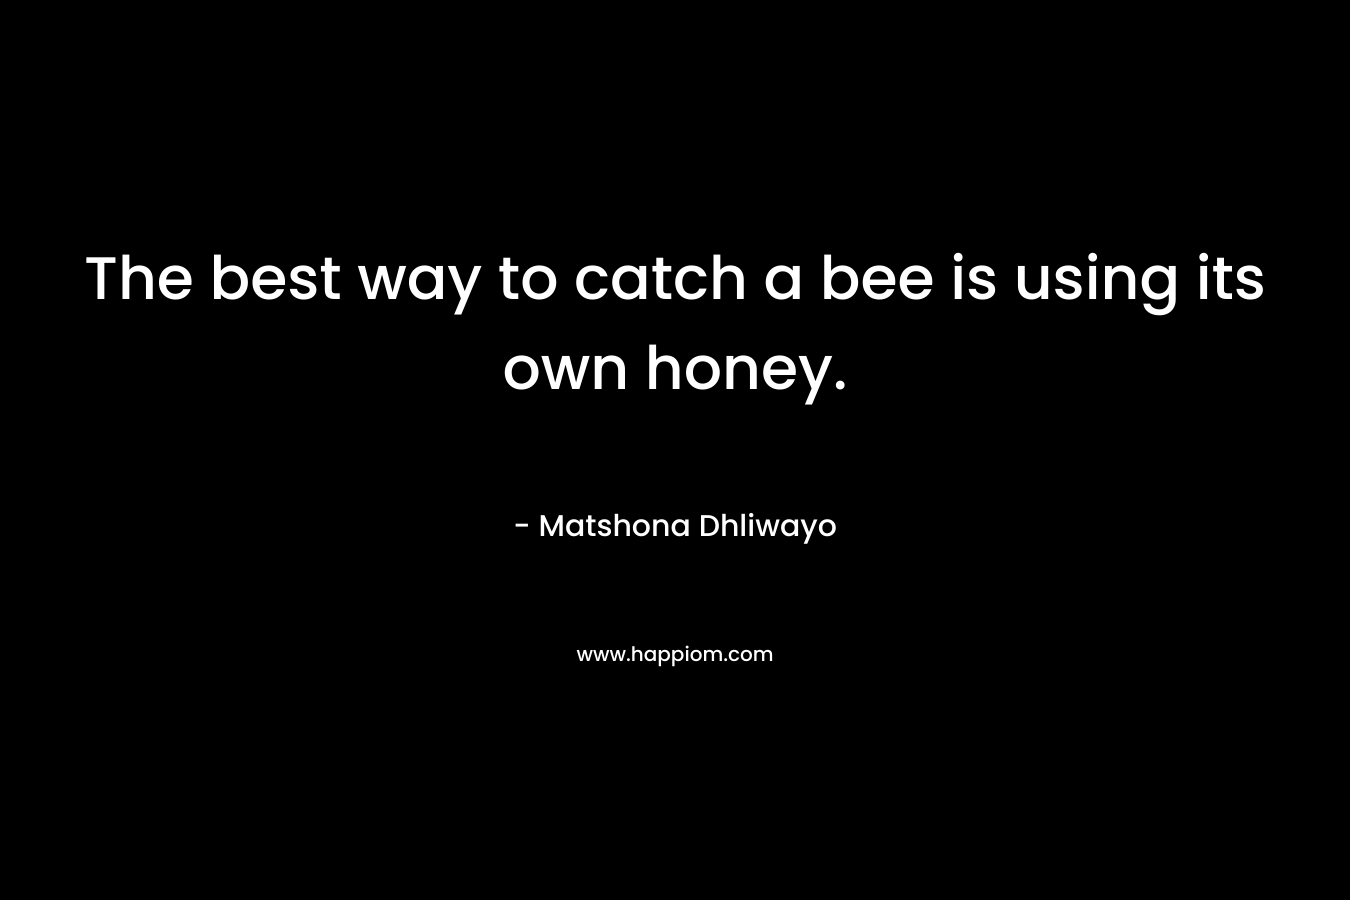 The best way to catch a bee is using its own honey. – Matshona Dhliwayo